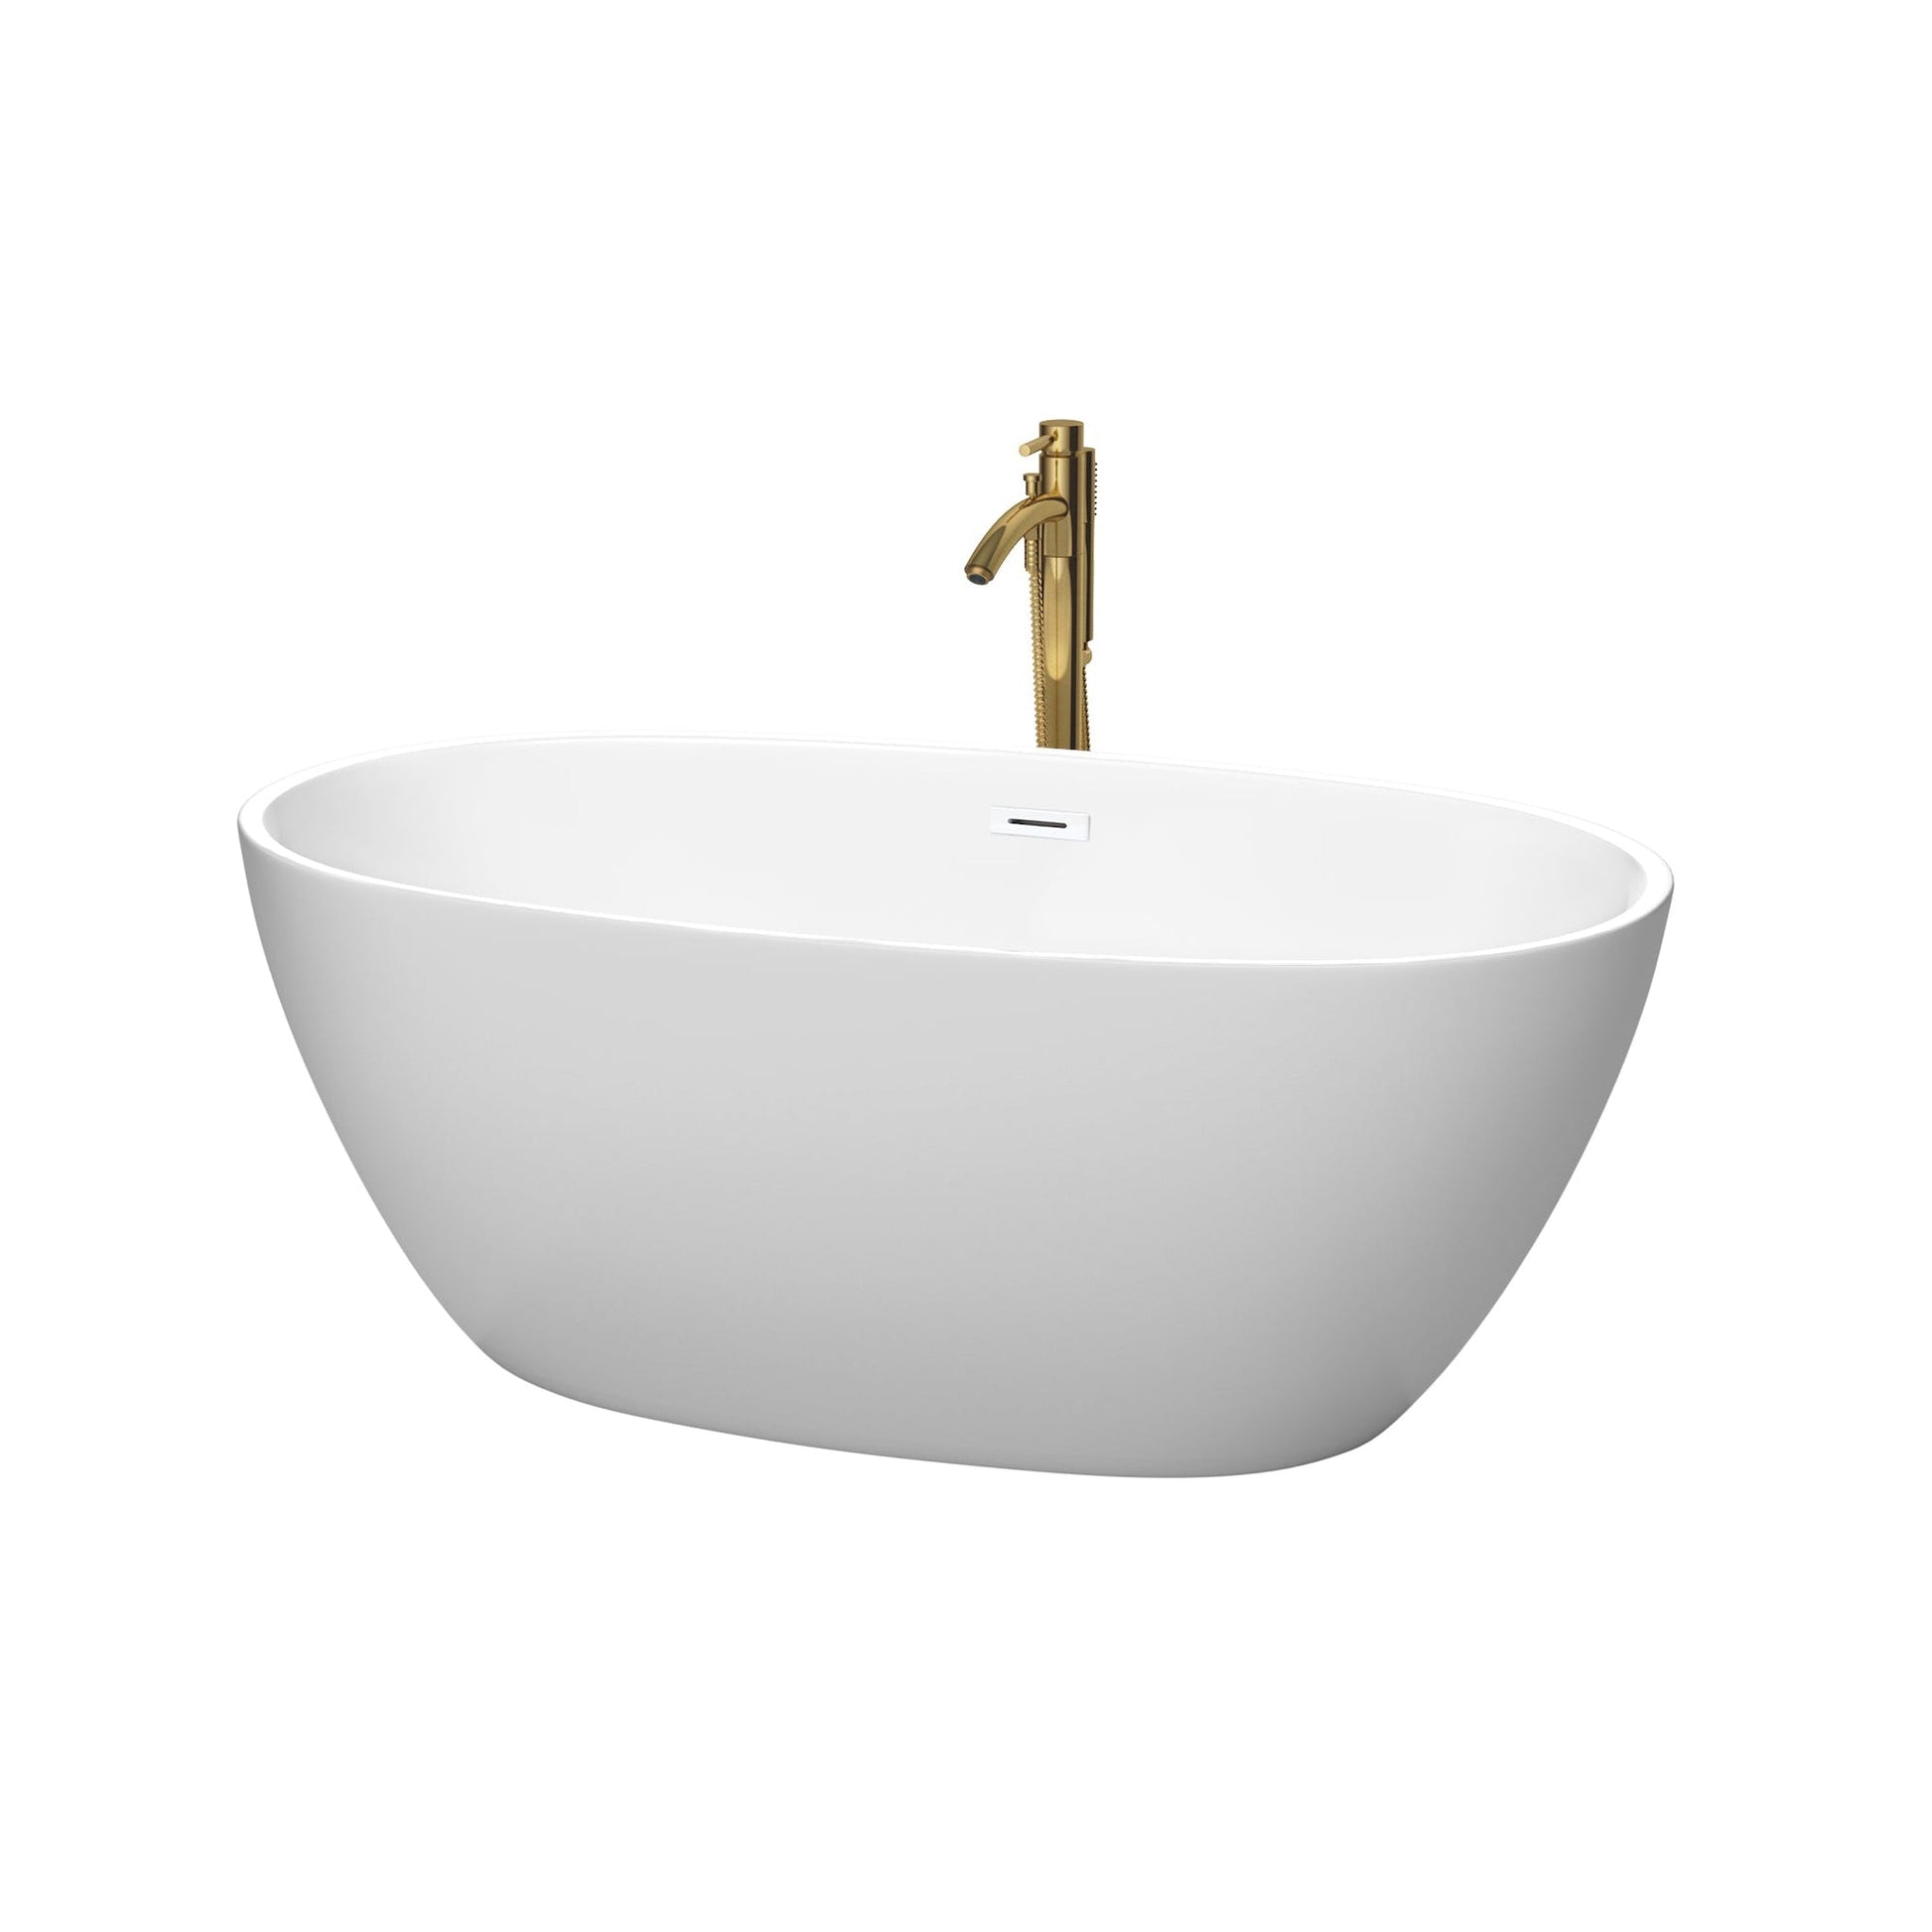 Wyndham Collection Juno 59" Freestanding Bathtub in Matte White With Shiny White Trim and Floor Mounted Faucet in Brushed Gold